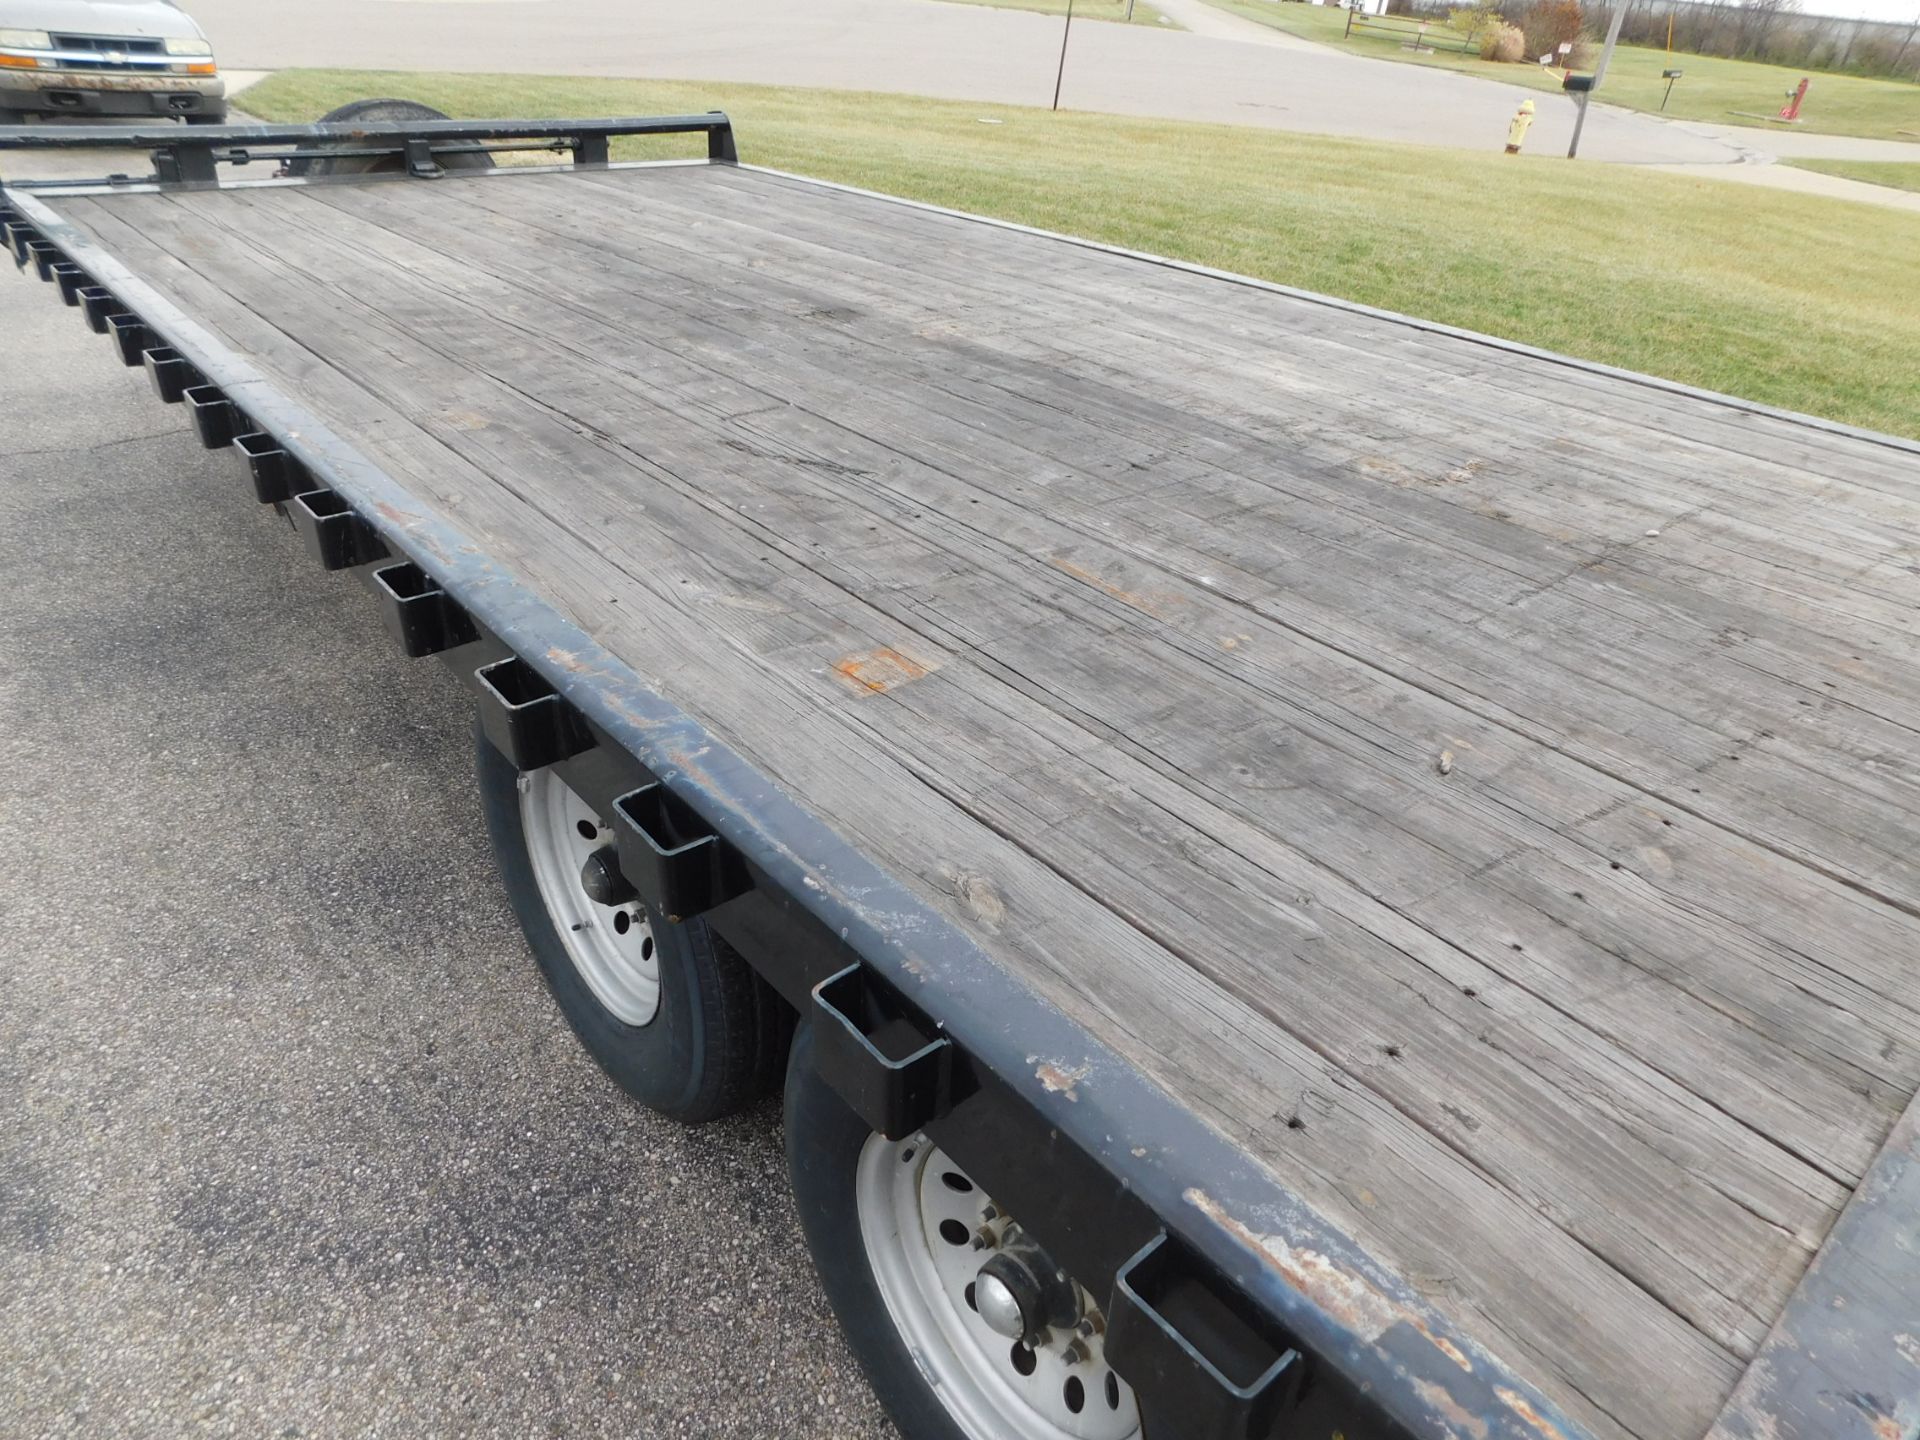 2009 Gatormade 21' Tandem Axle Equipment Trailer, 14,000 GVWR, 16' Deck with 5' Dovetail, 5' Trailer - Image 4 of 12